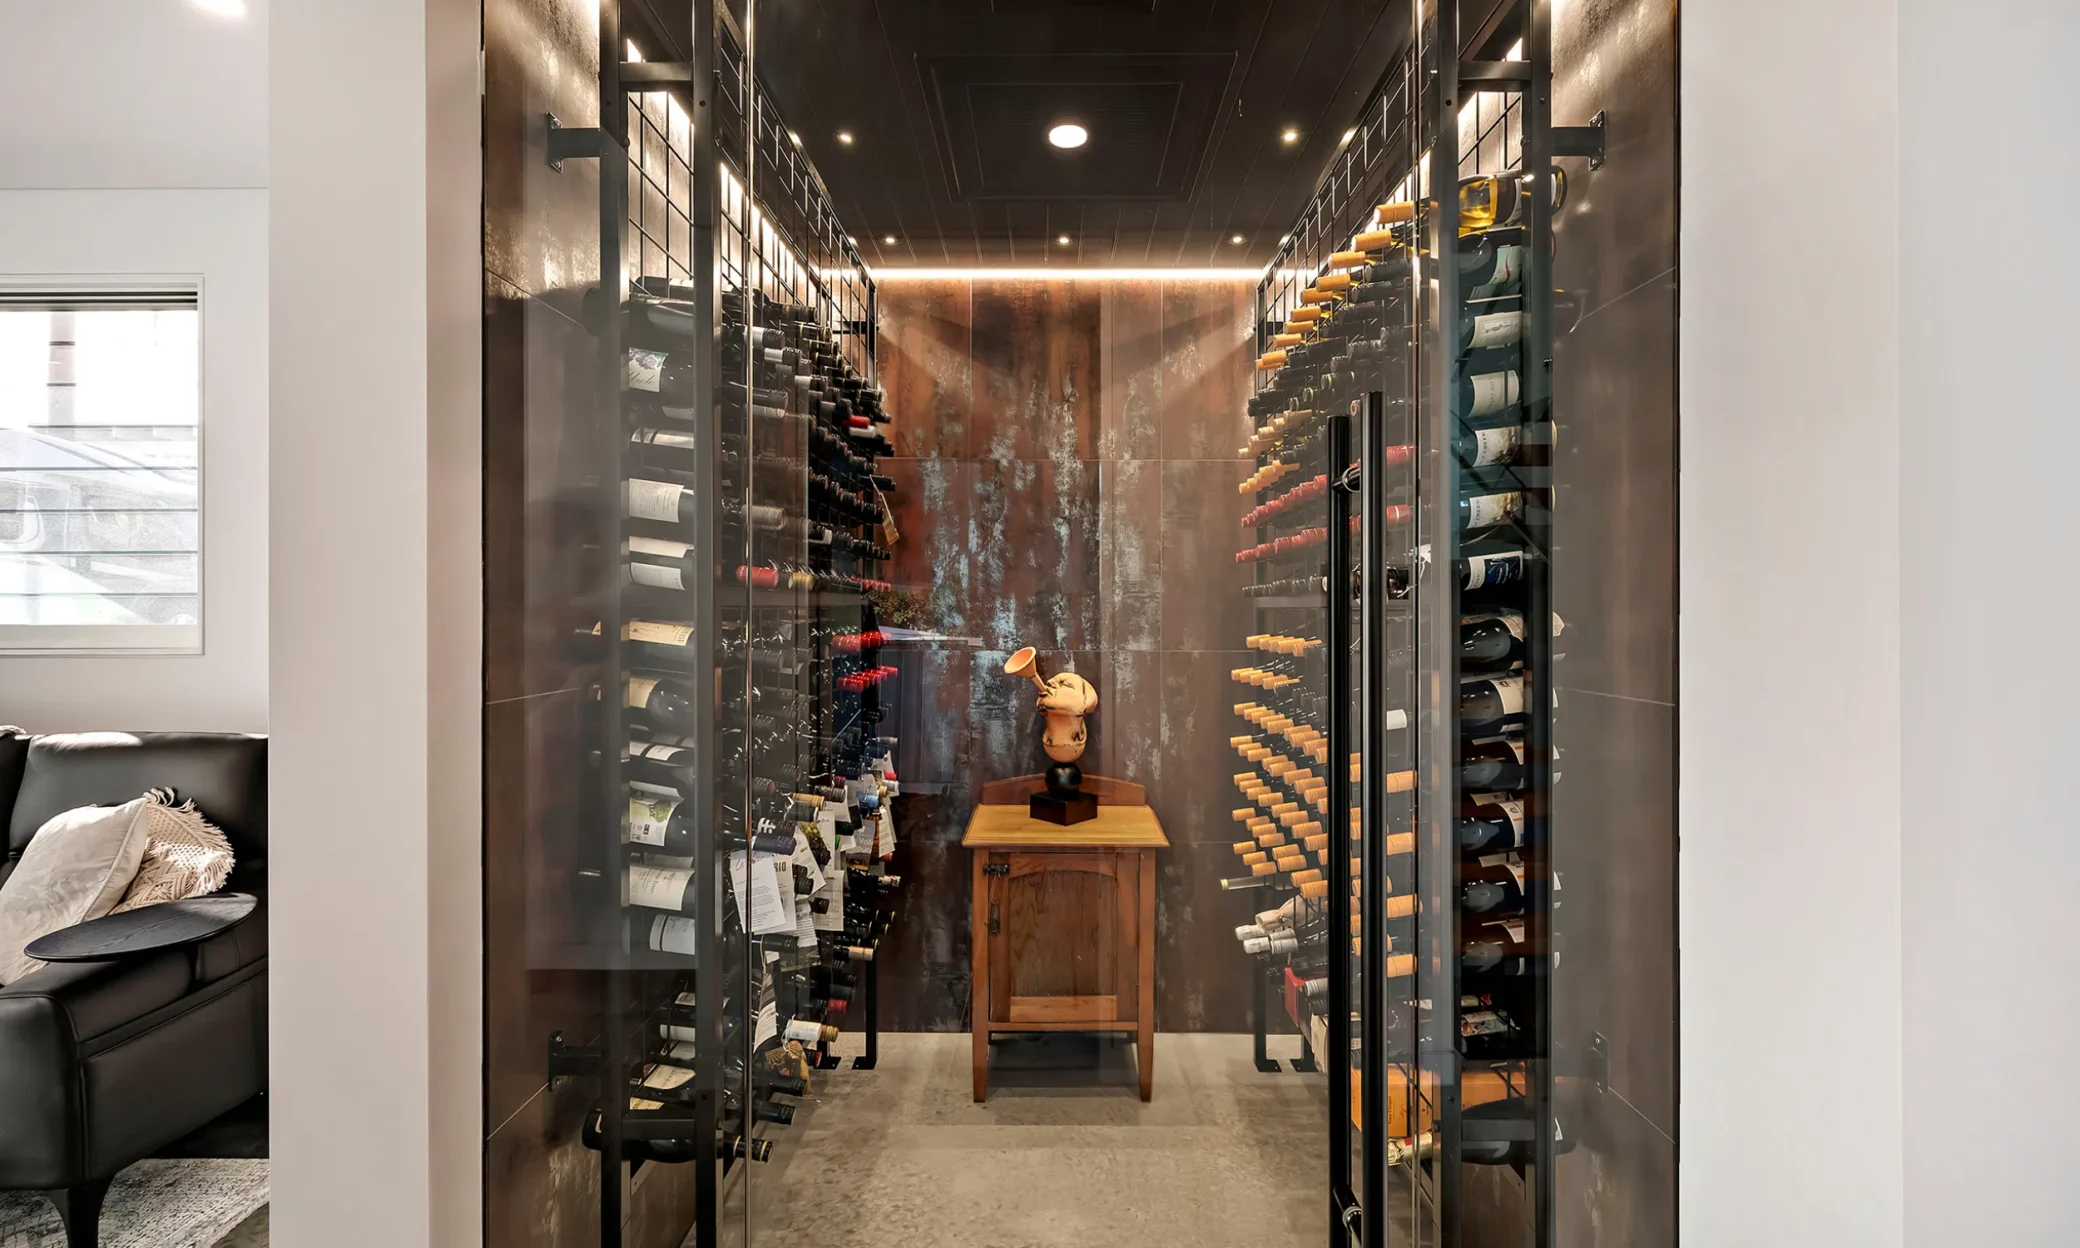 A modern wine cellar with floor-to-ceiling metal racks on each side filled with various wine bottles. A custom-built wood statue of a violinist centers the room with a spotlight overhead. The room features